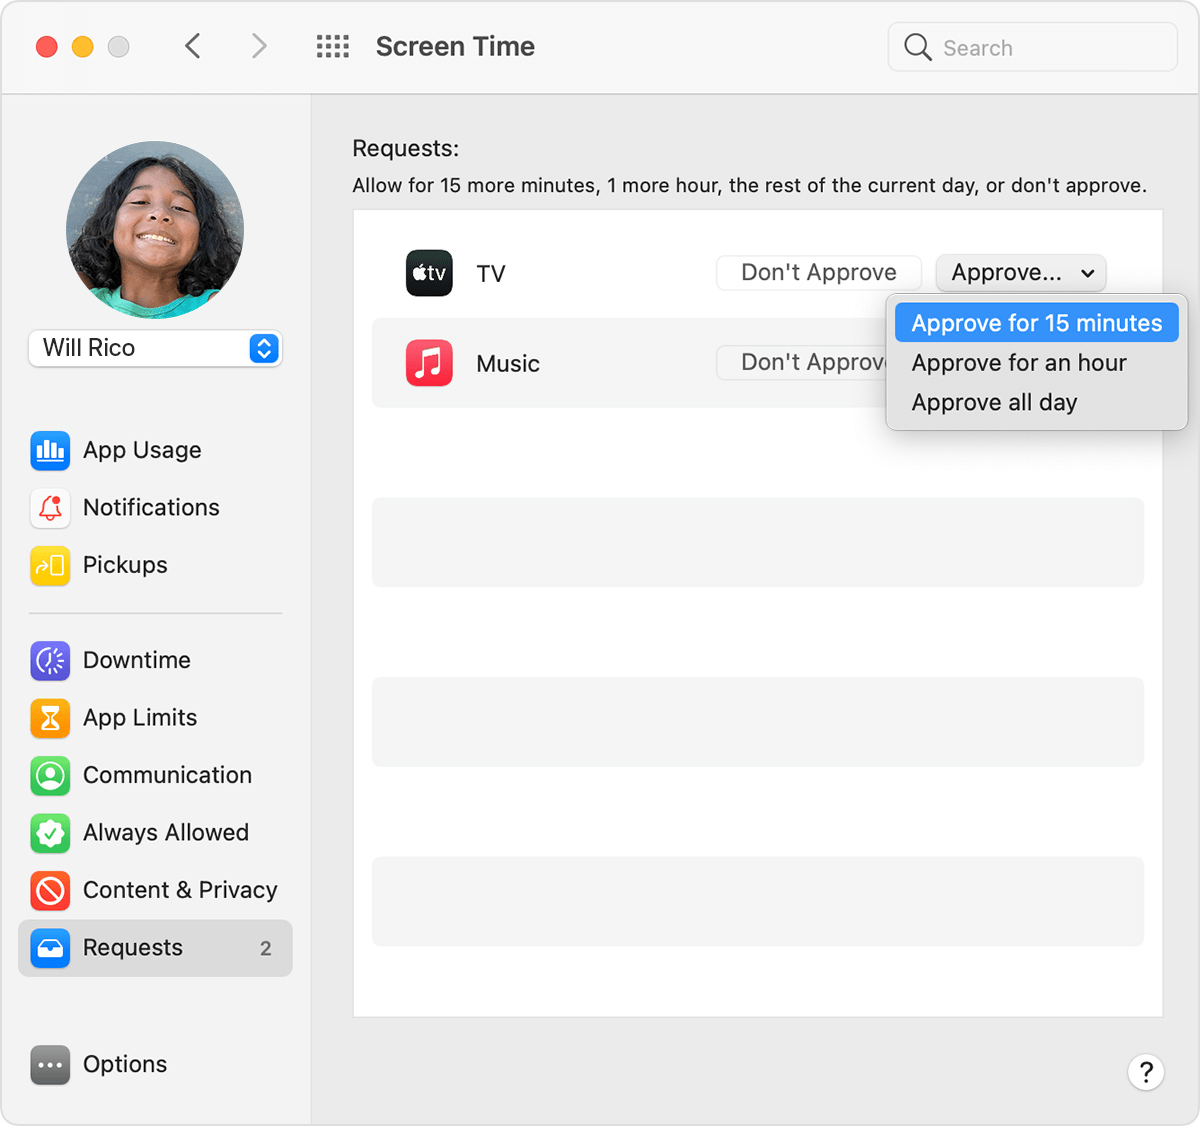 Screen Time preferences: Requests